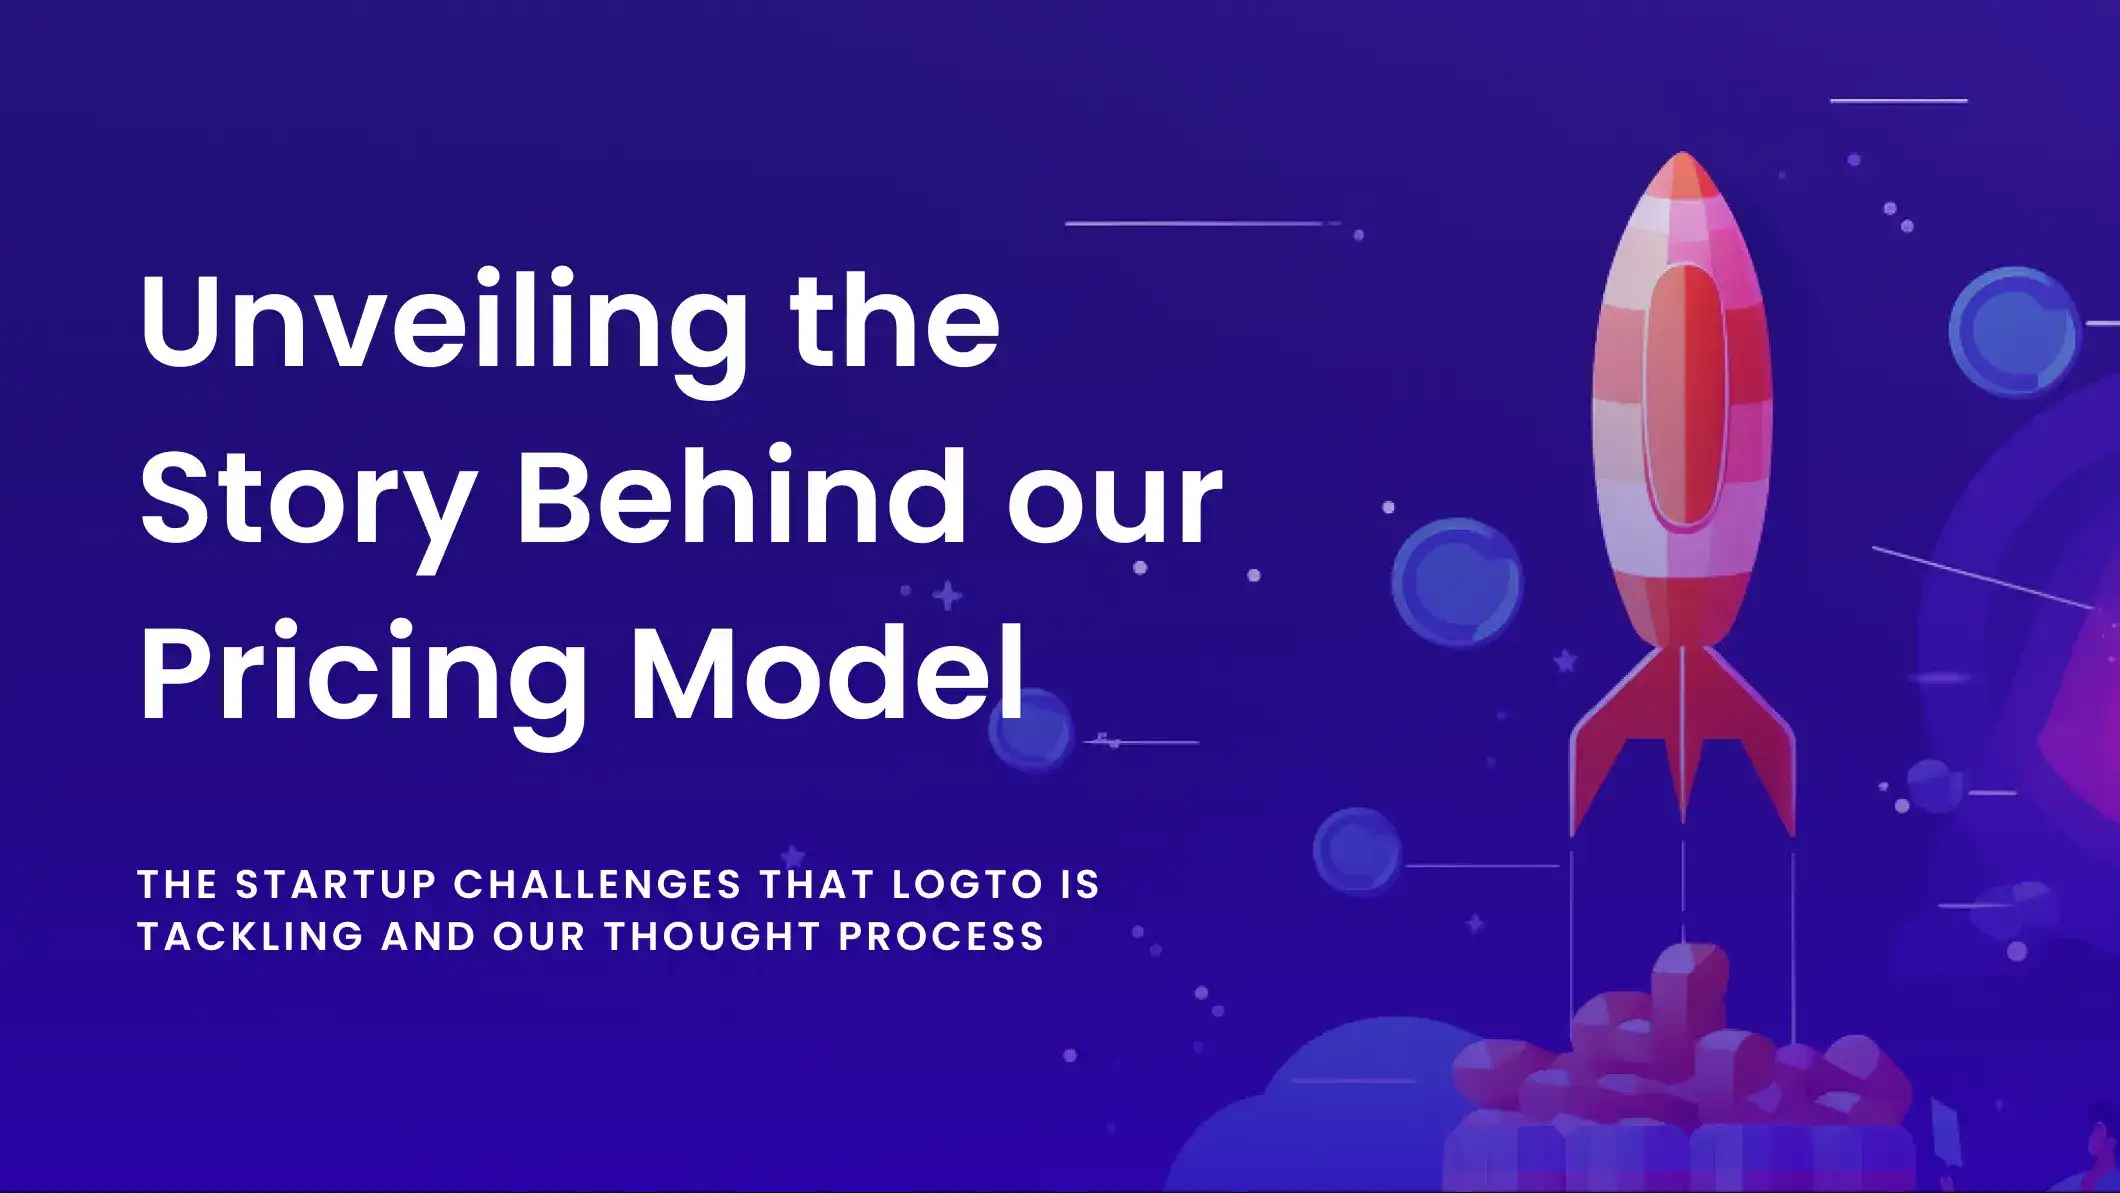 Logto unveiled a new pricing model to tackle startup hurdles behind the scenes